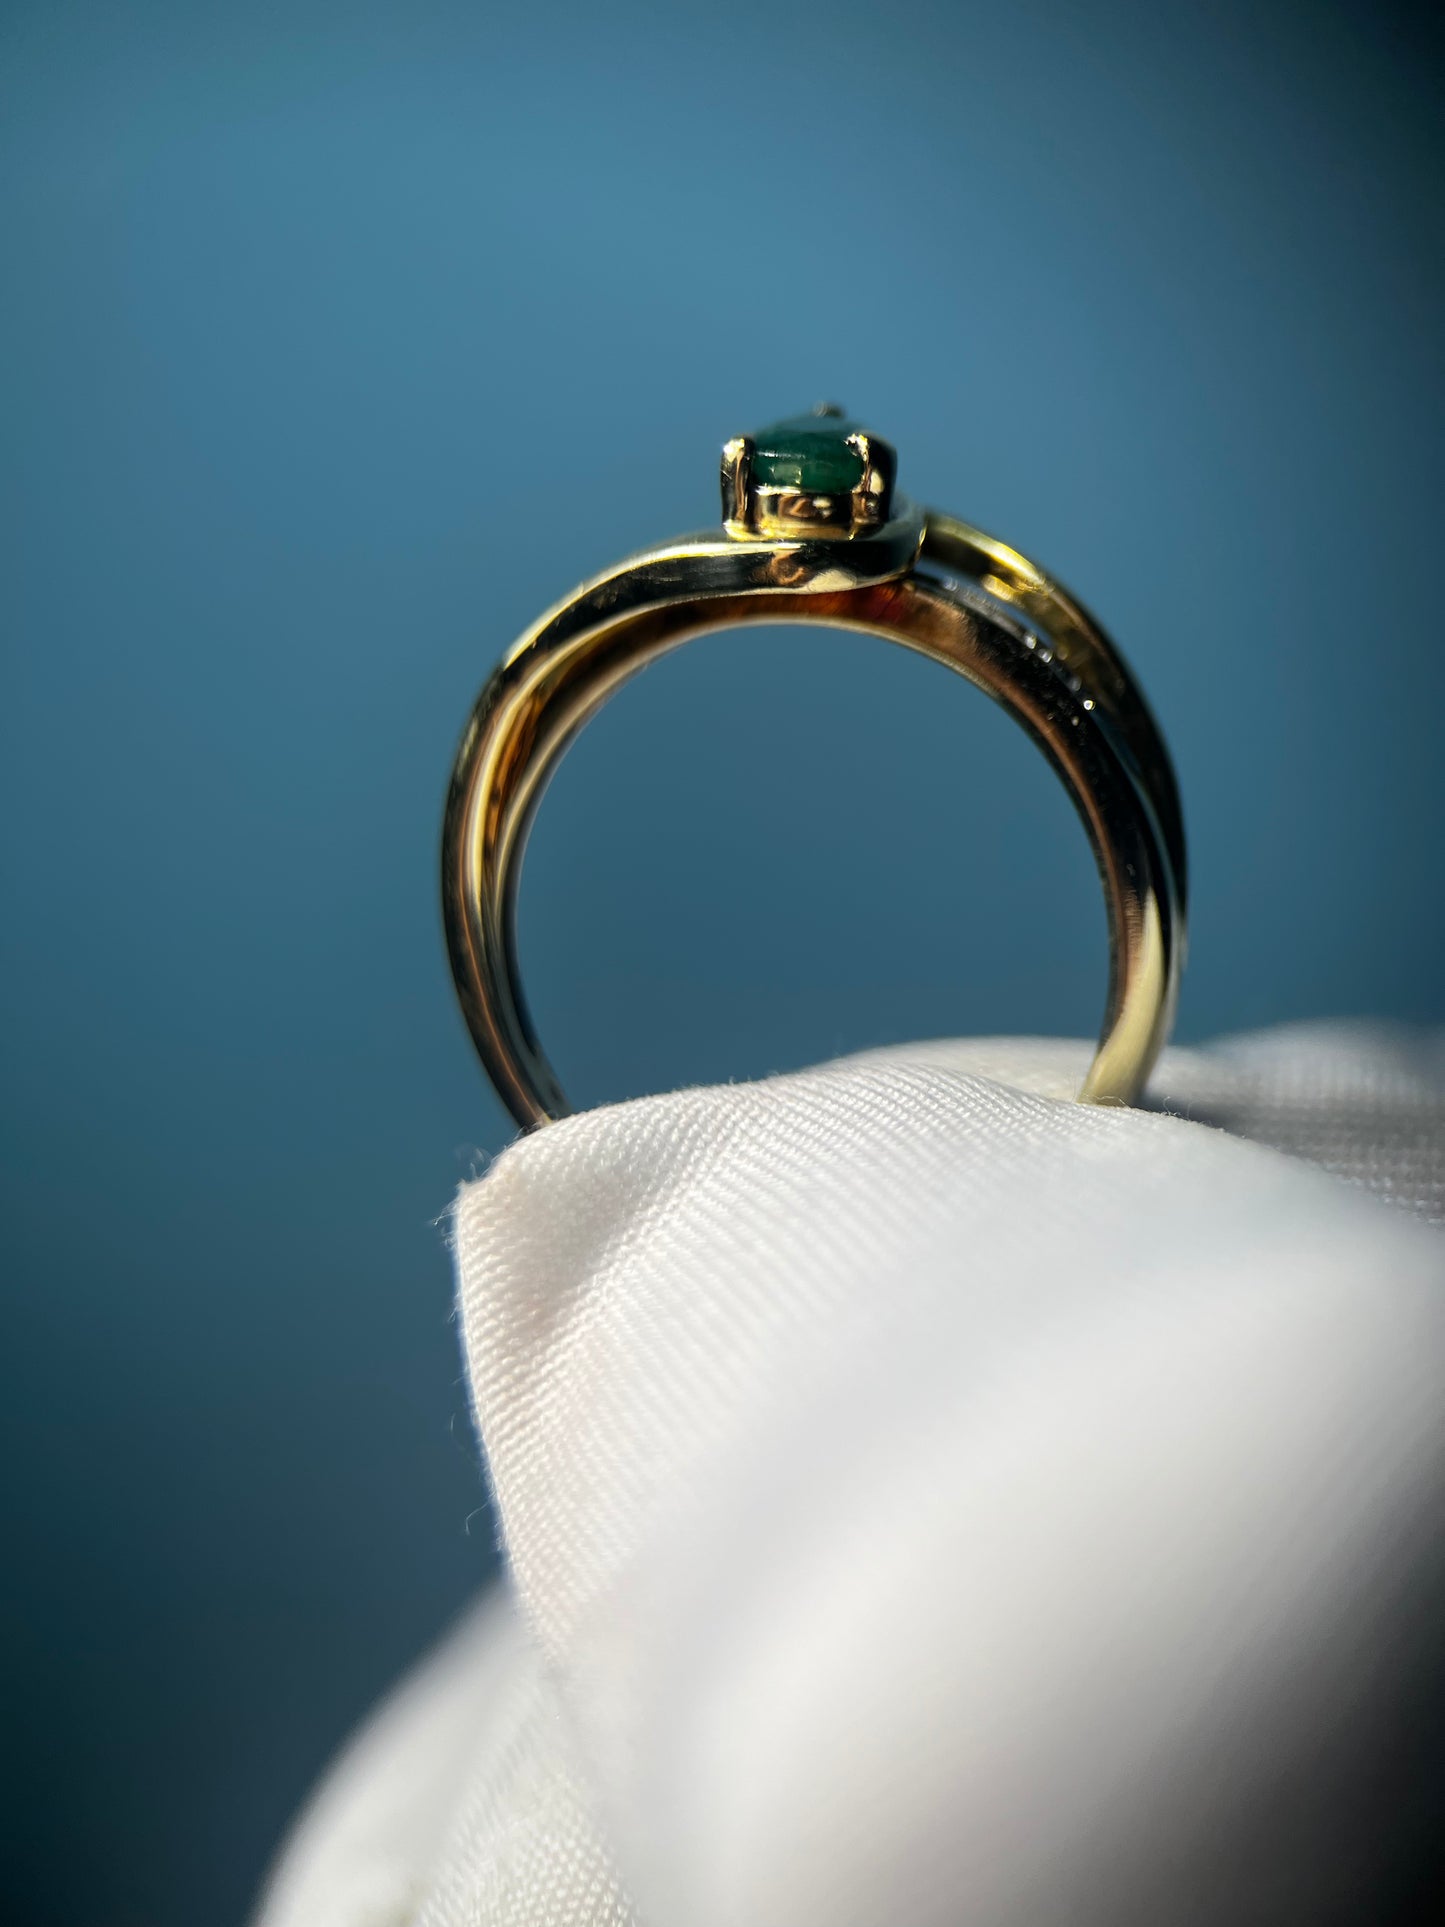 Natural Pear Emerald Ring in 10k Yellow Gold